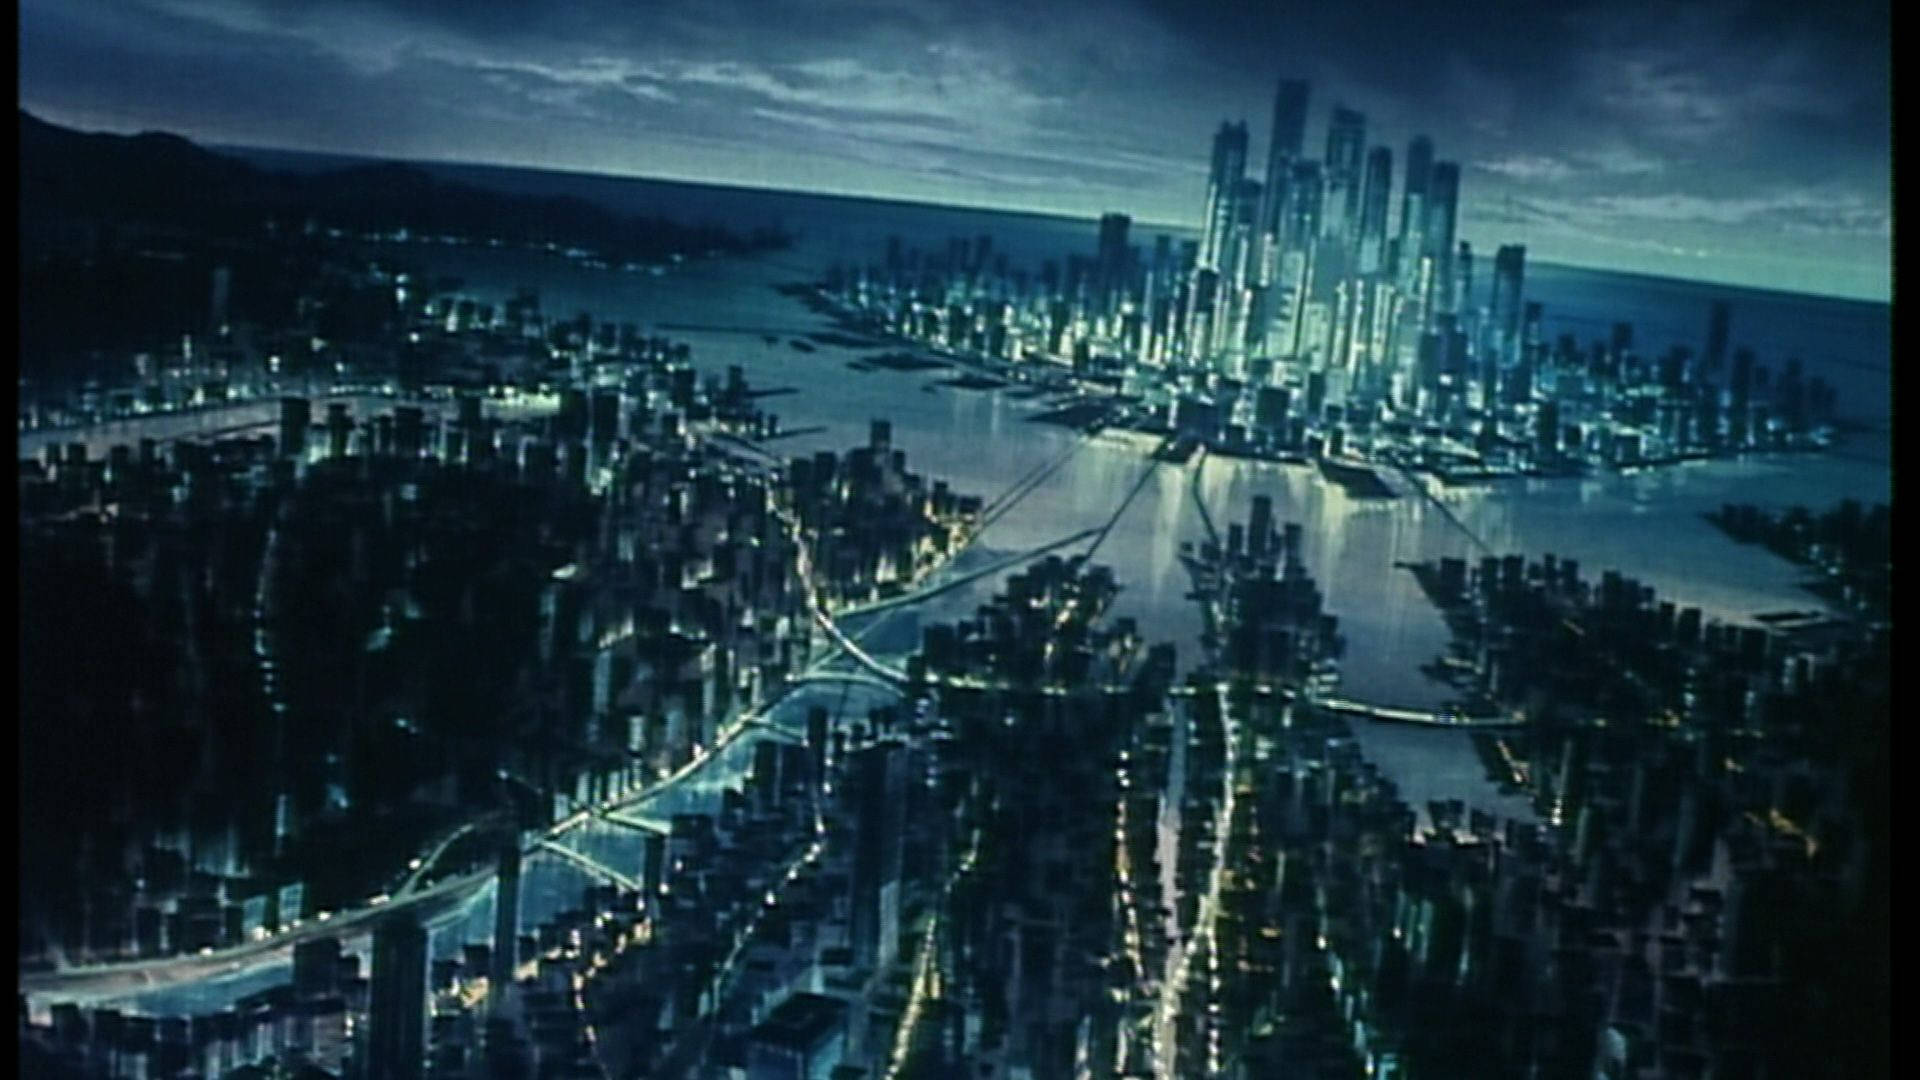 Ghost In The Shell Metropolis Background